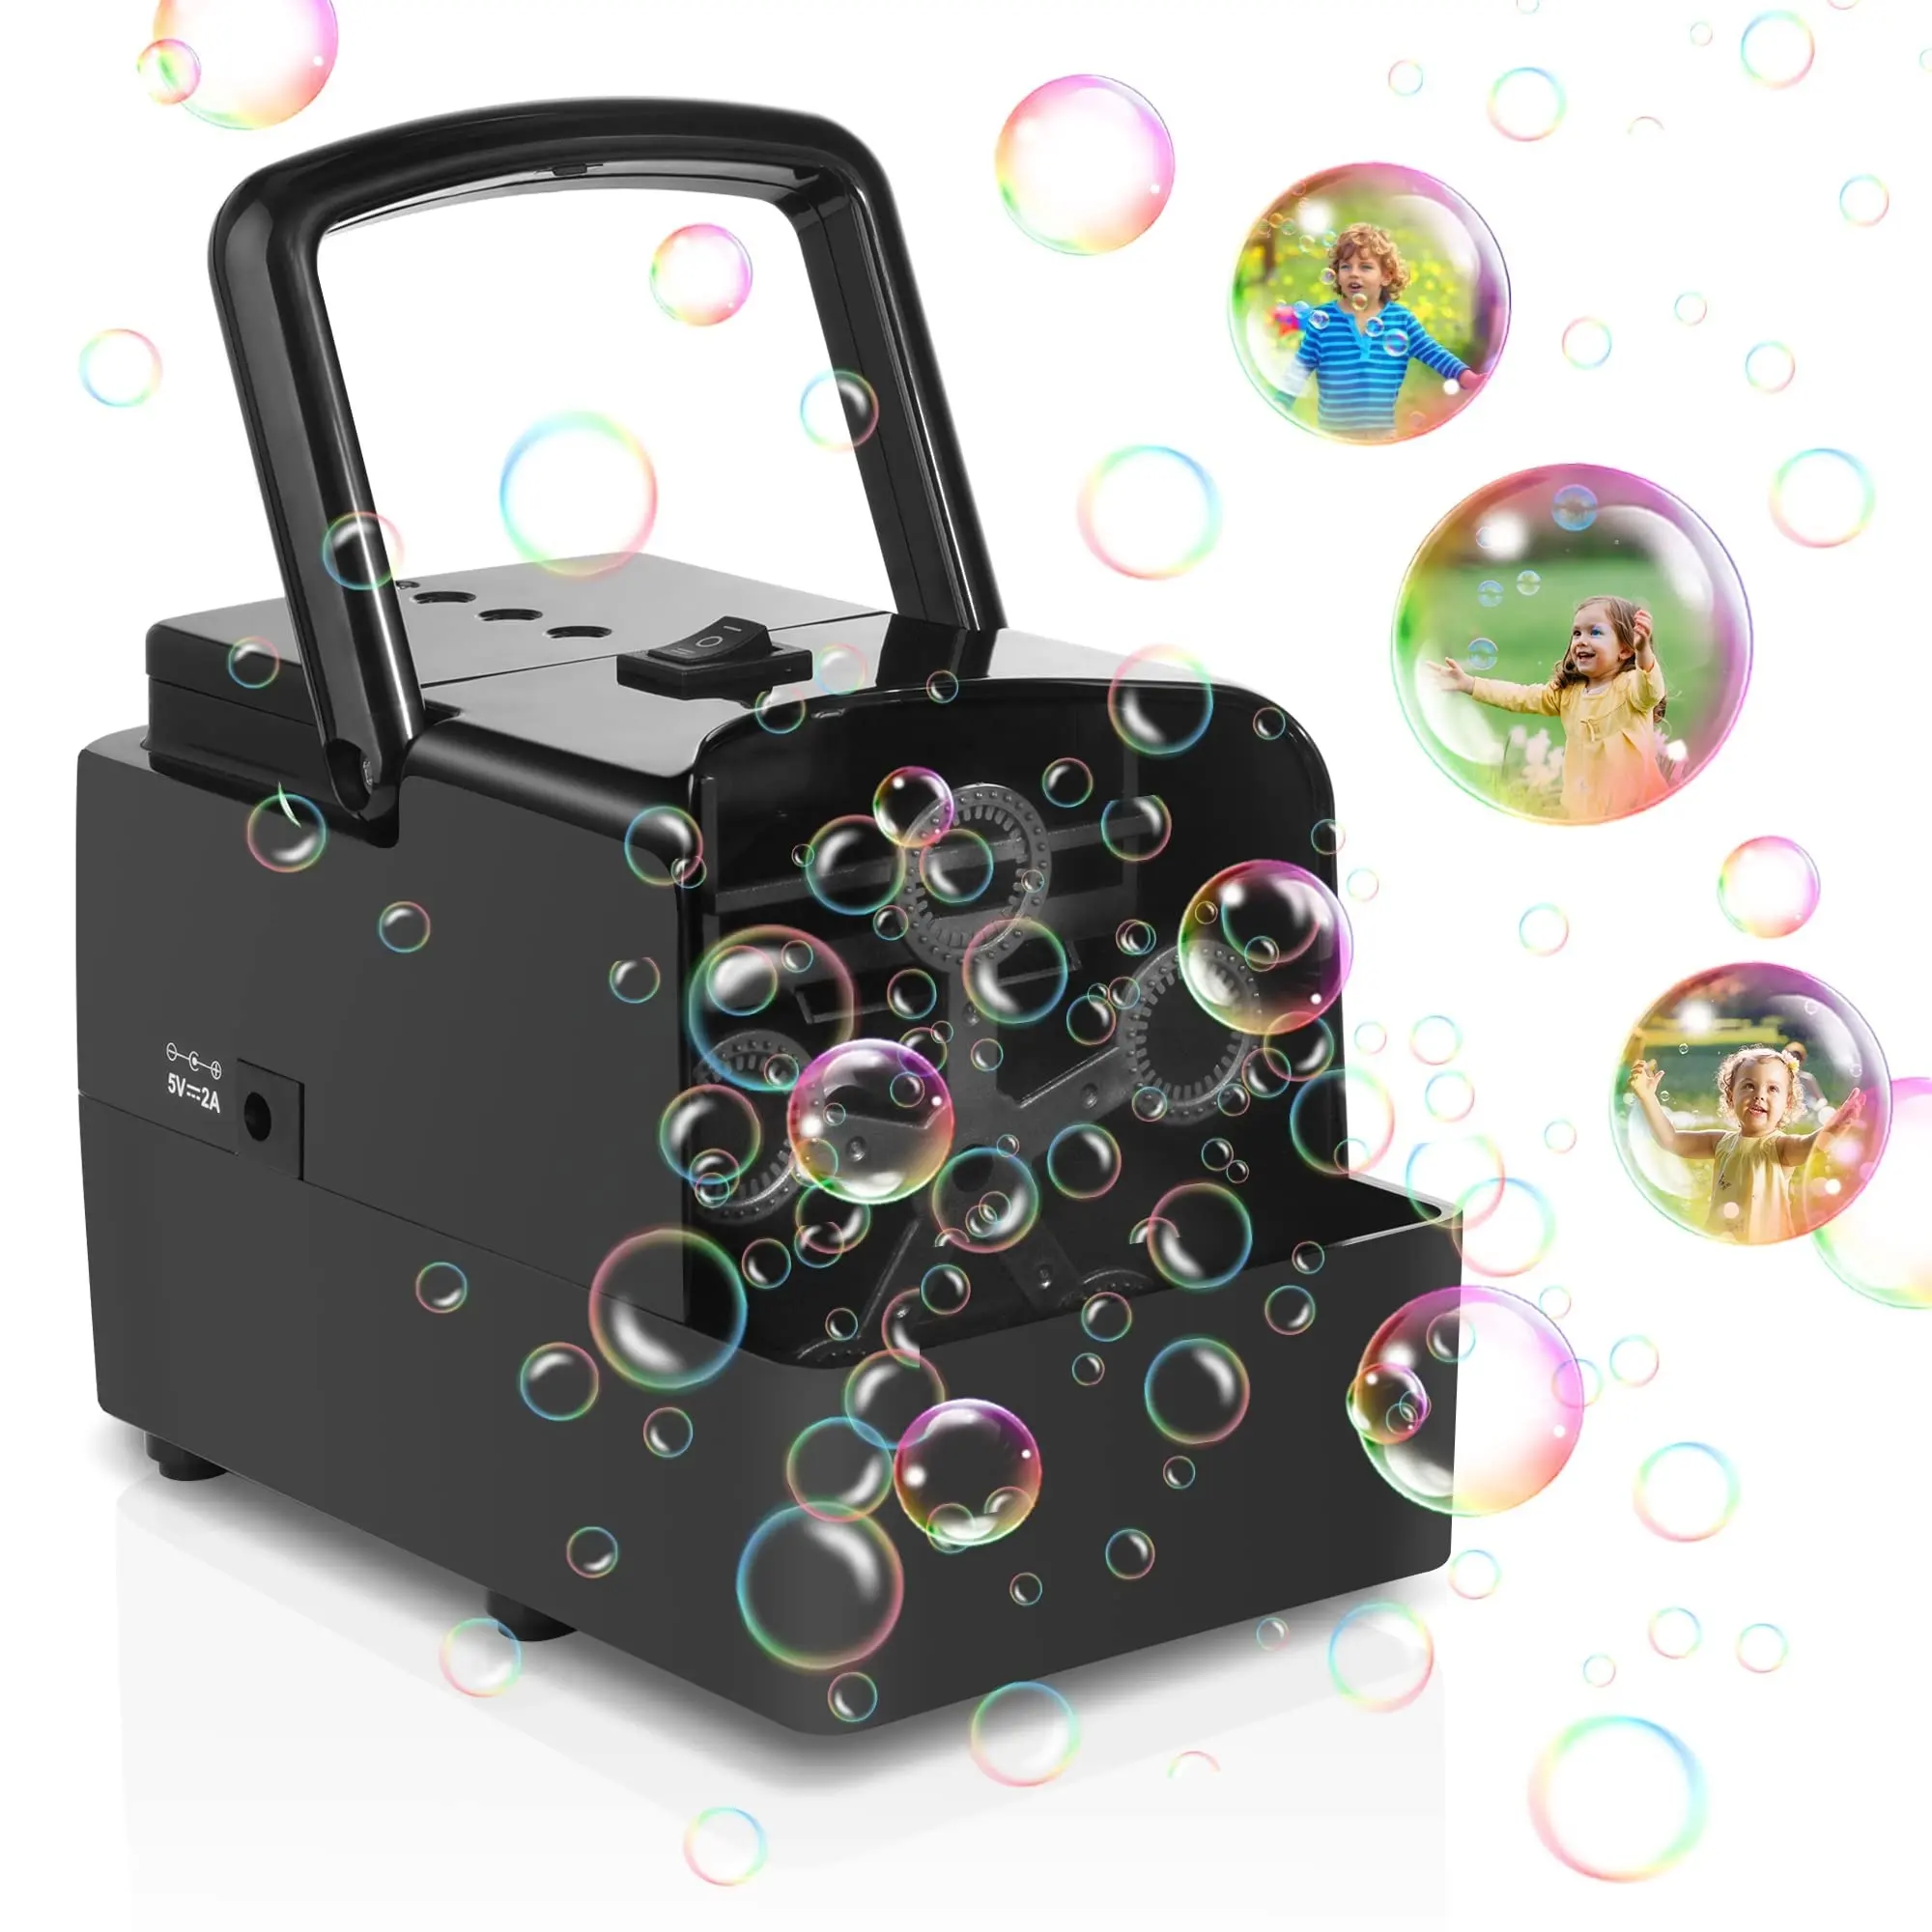 Mini Bubble Machine, Powered by Batteries or USB Power Cord, Bubble Toys for Kids Toddlers